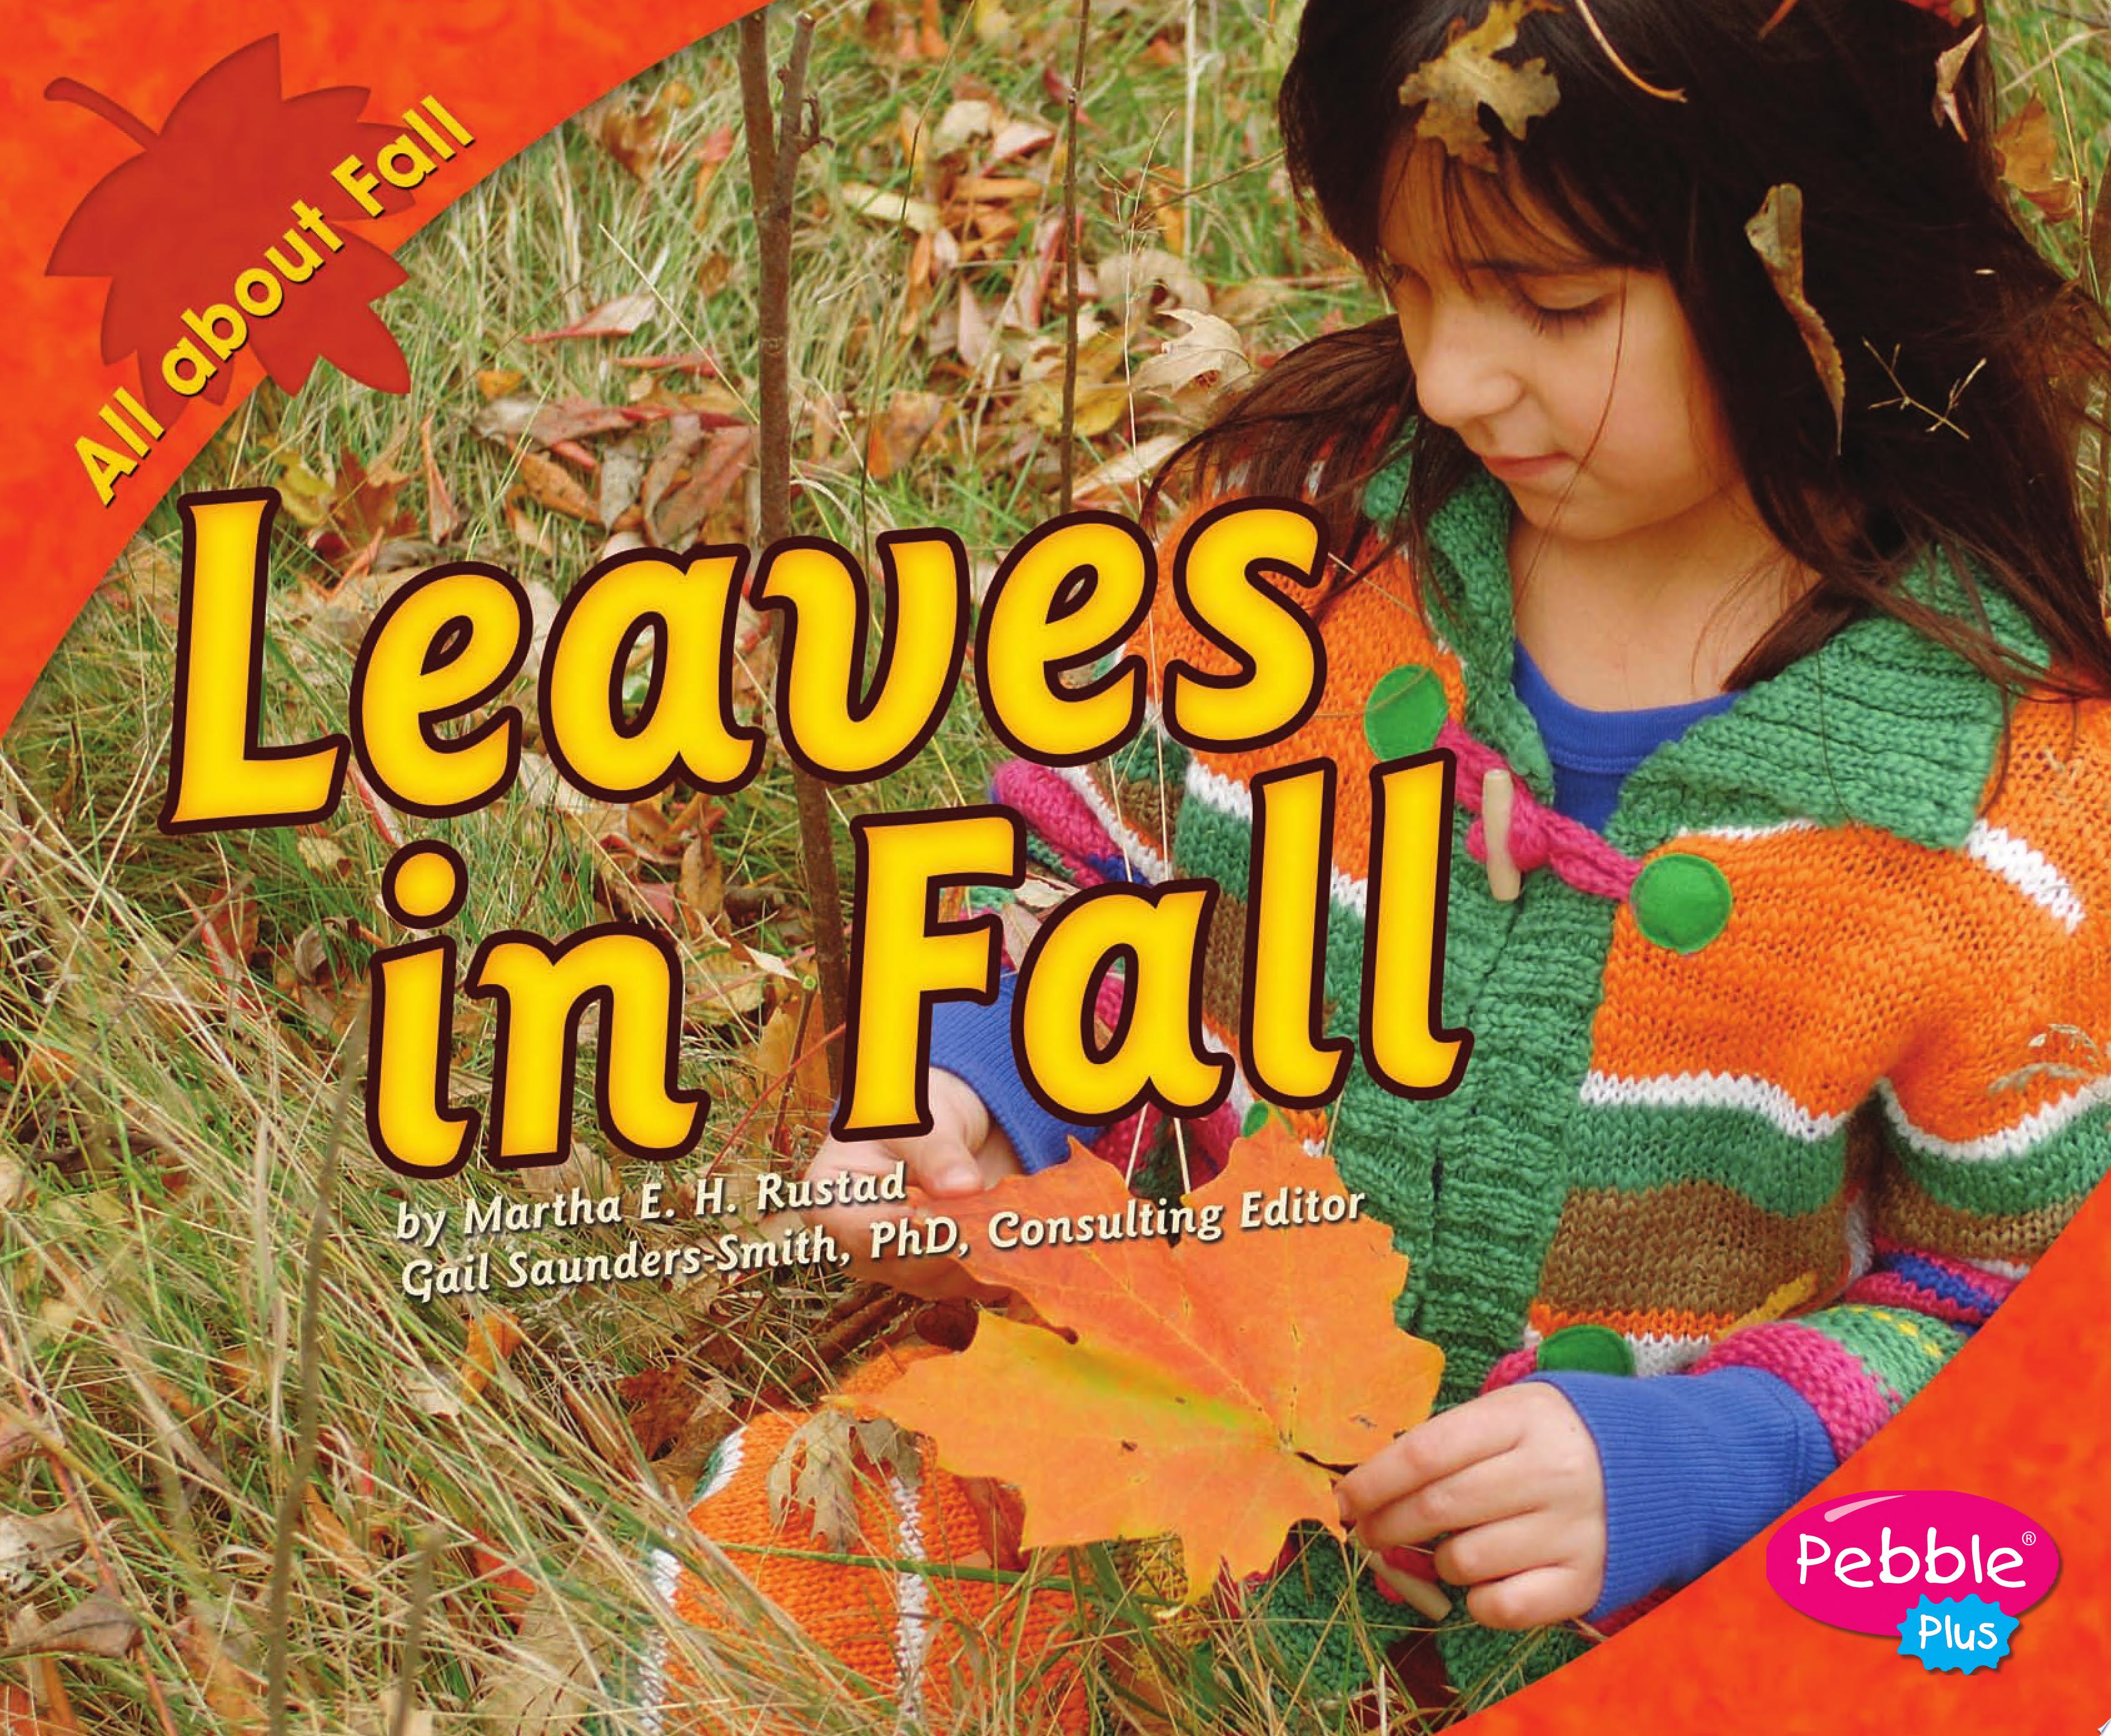 Image for "Leaves in Fall"